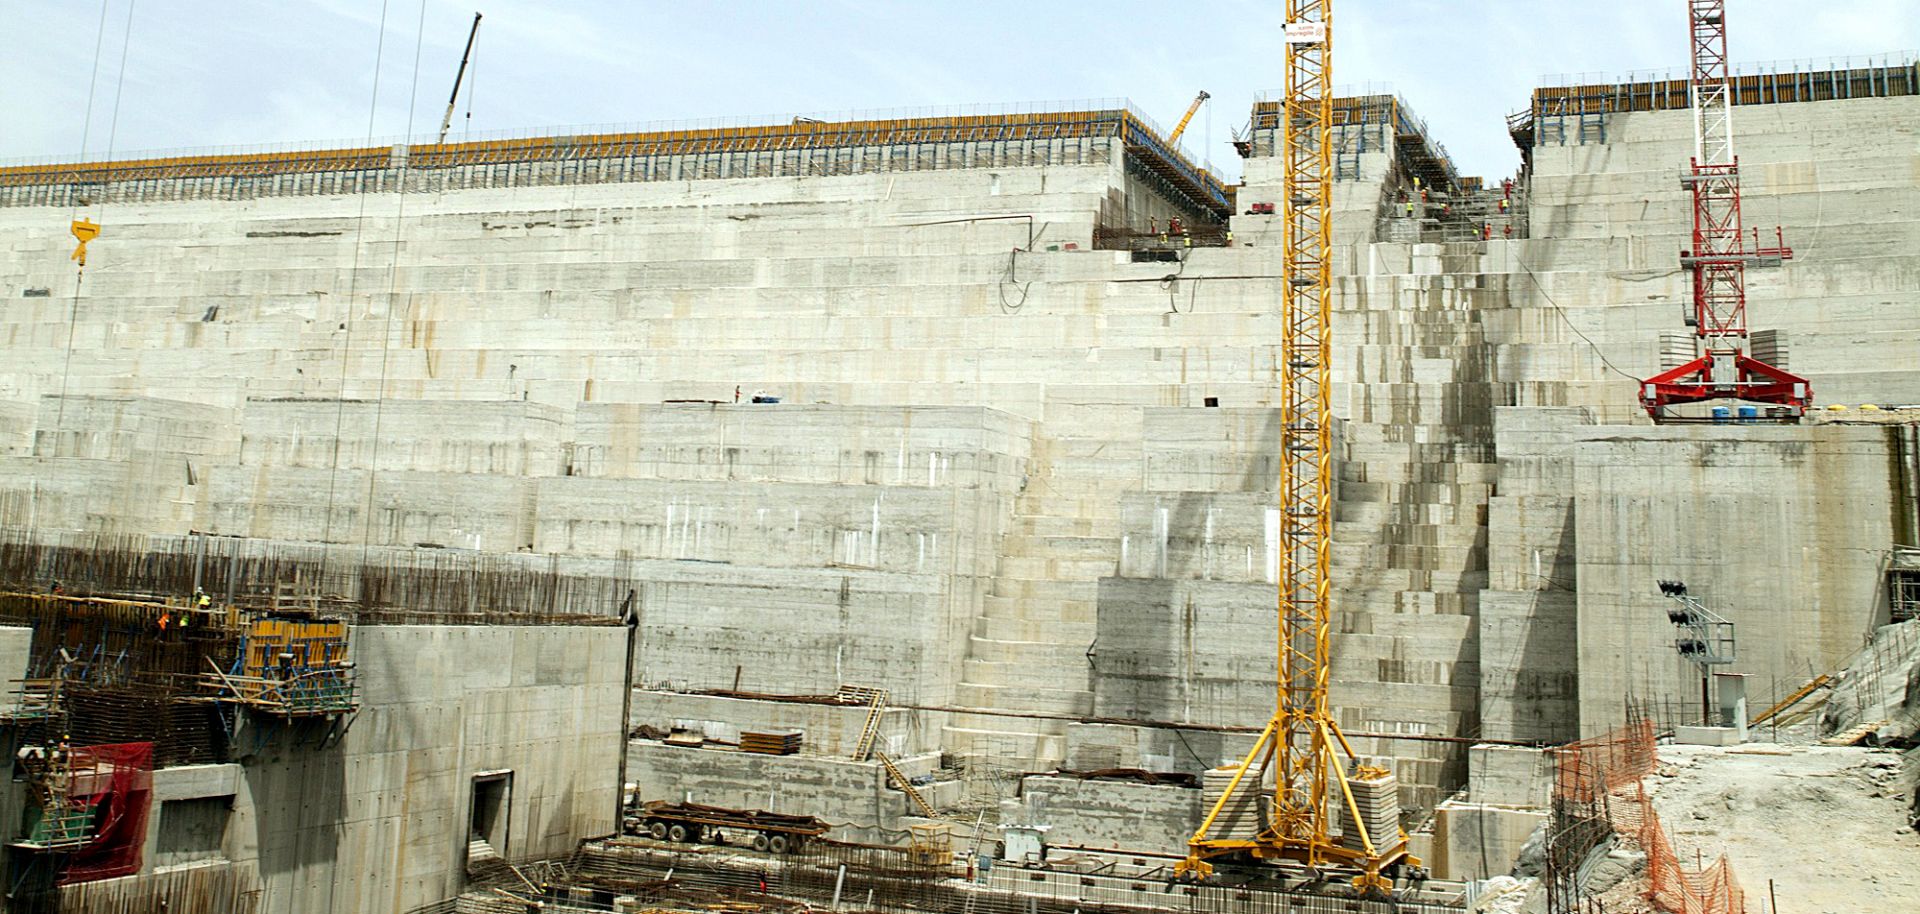 This photograph shows the Grand Ethiopian Renaissance Dam in 2015. The hydroelectric project near the Sudanese-Ethiopian border is nearing completion.